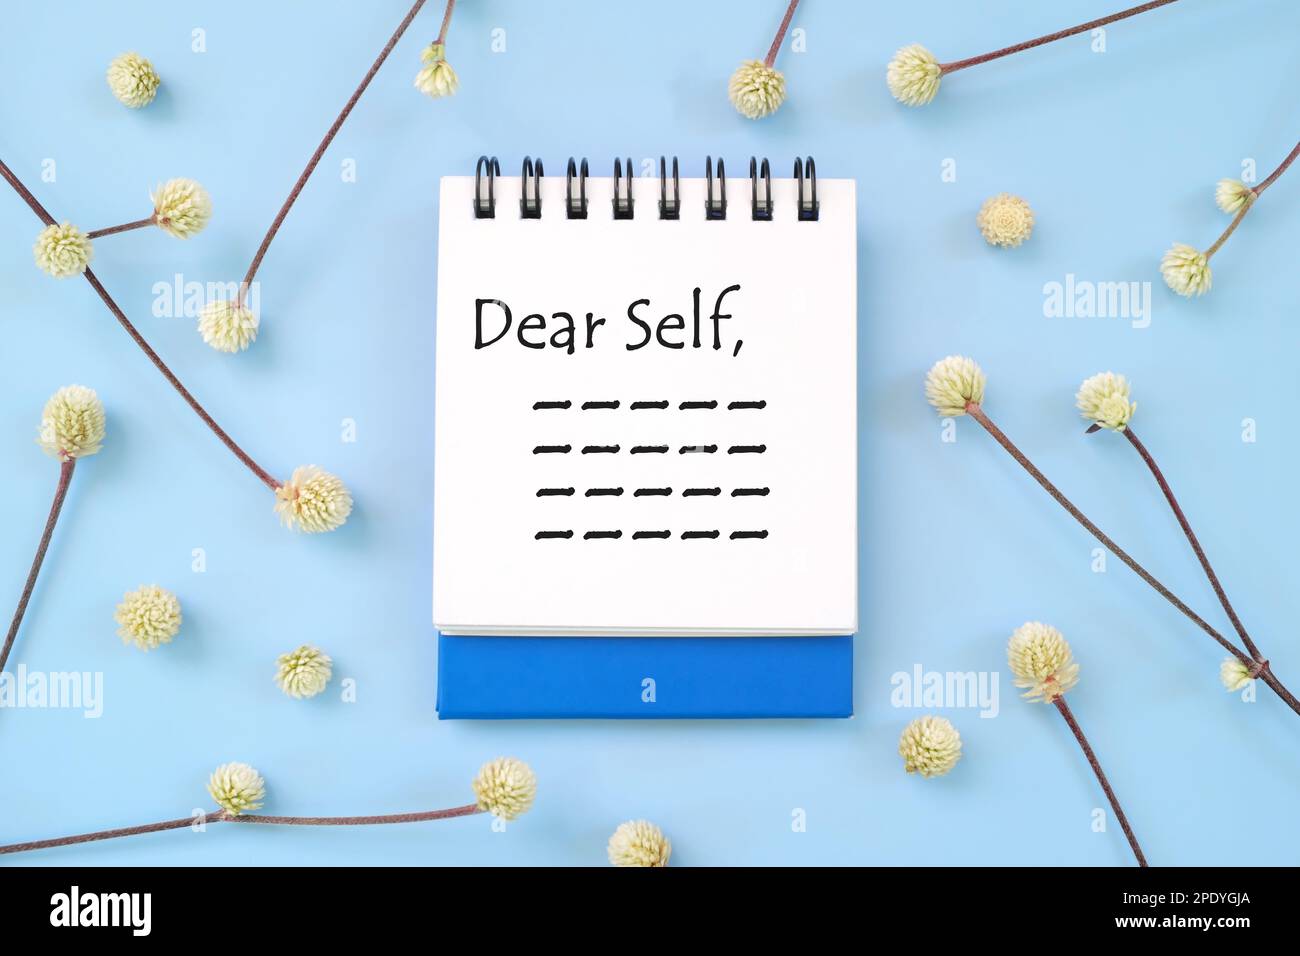 Dear self, personal reflection and advice to self concept. Flat lay journal diary in blue background. Stock Photo